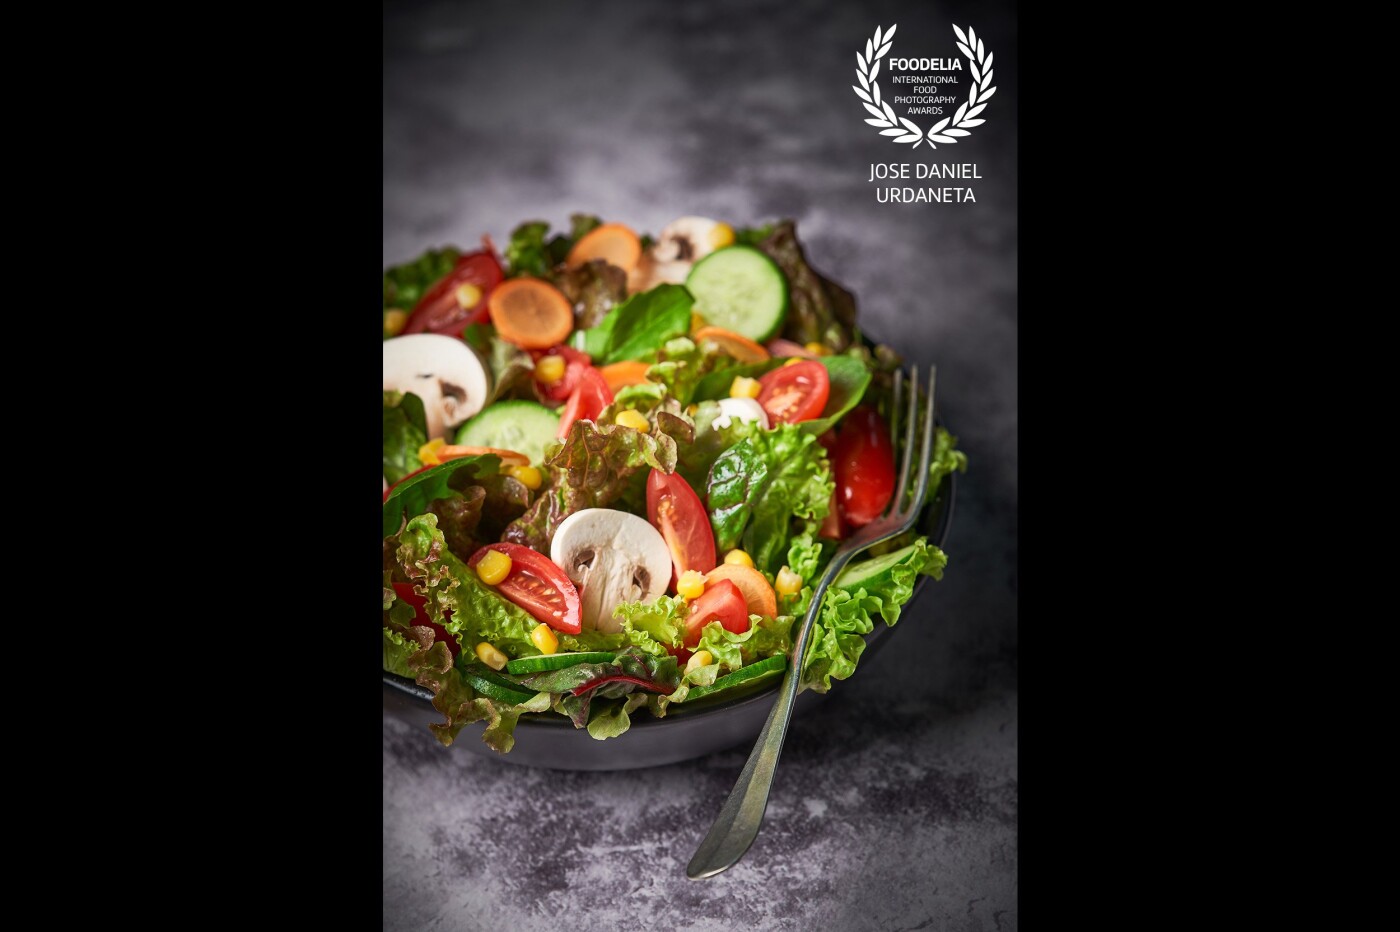 This photo was made in a food styling workshop by Marcela Lovegrove. The students set up the salad and I was the photographer in charge.<br />
<br />
Taken with Sony a7iii + Sony 70-200 2.8 GM